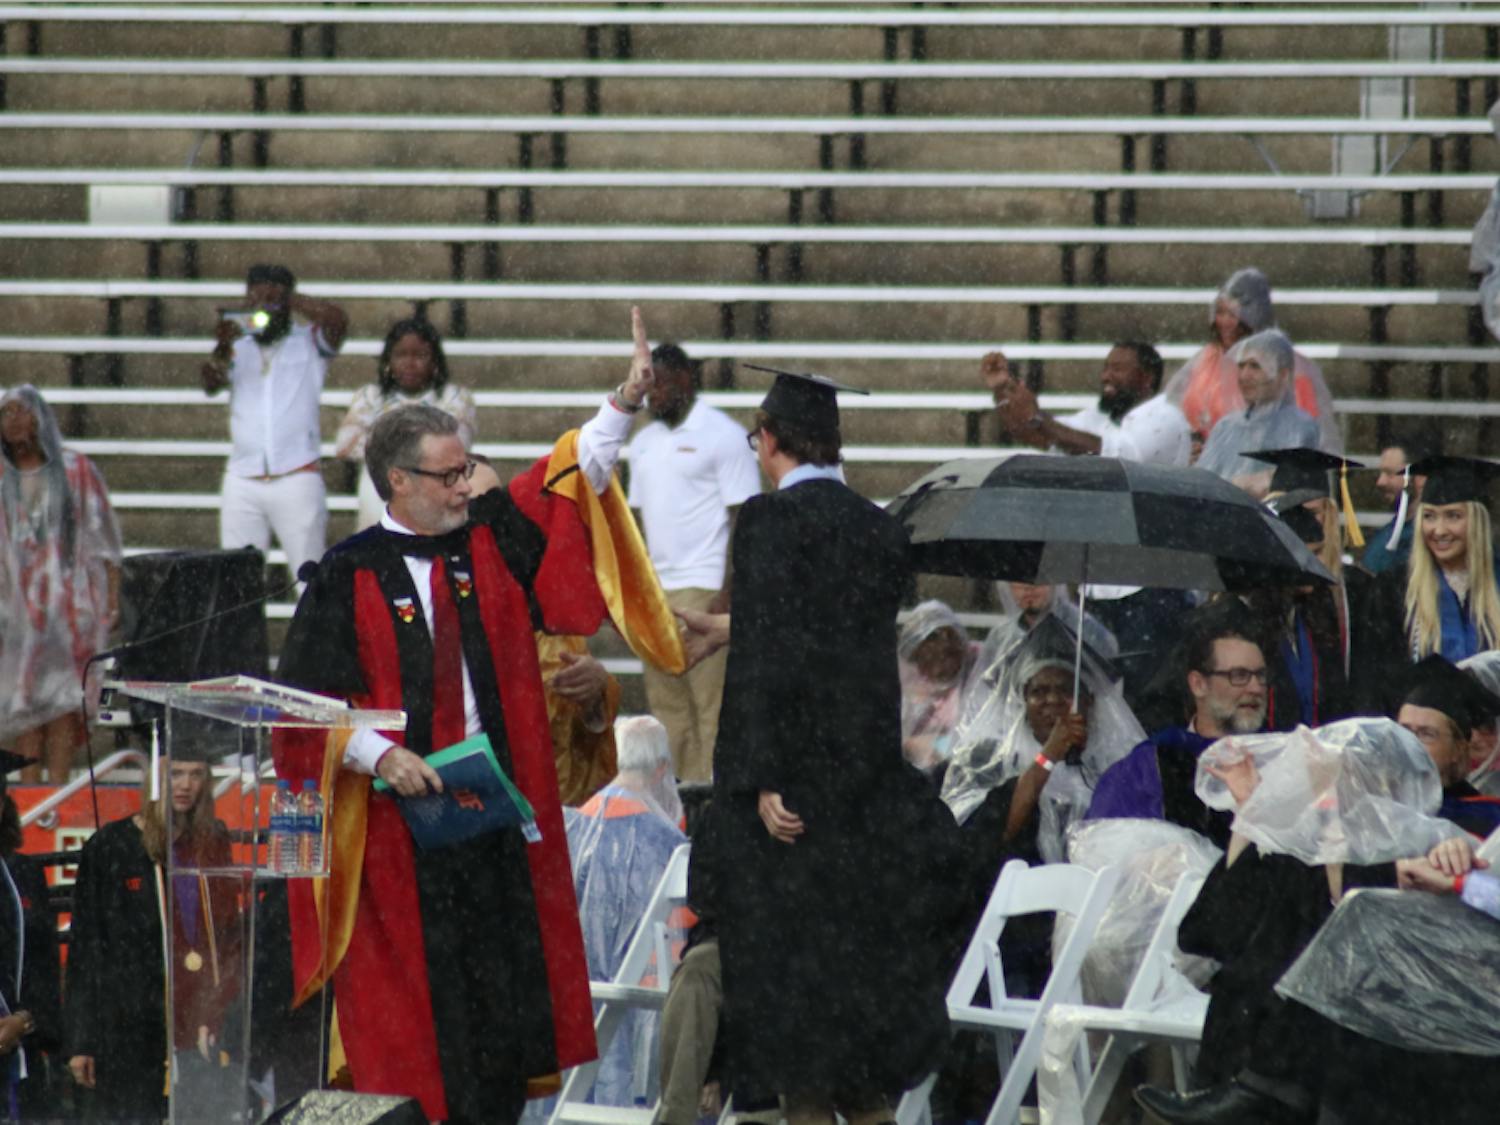 College of Liberal Arts and Sciences Dean, David Richardson, gestures to pause the commencement ceremony. Richardson announced the ceremony would be delayed by 30 minutes, but the ceremony was later moved to an inside
hallway of the stadium.